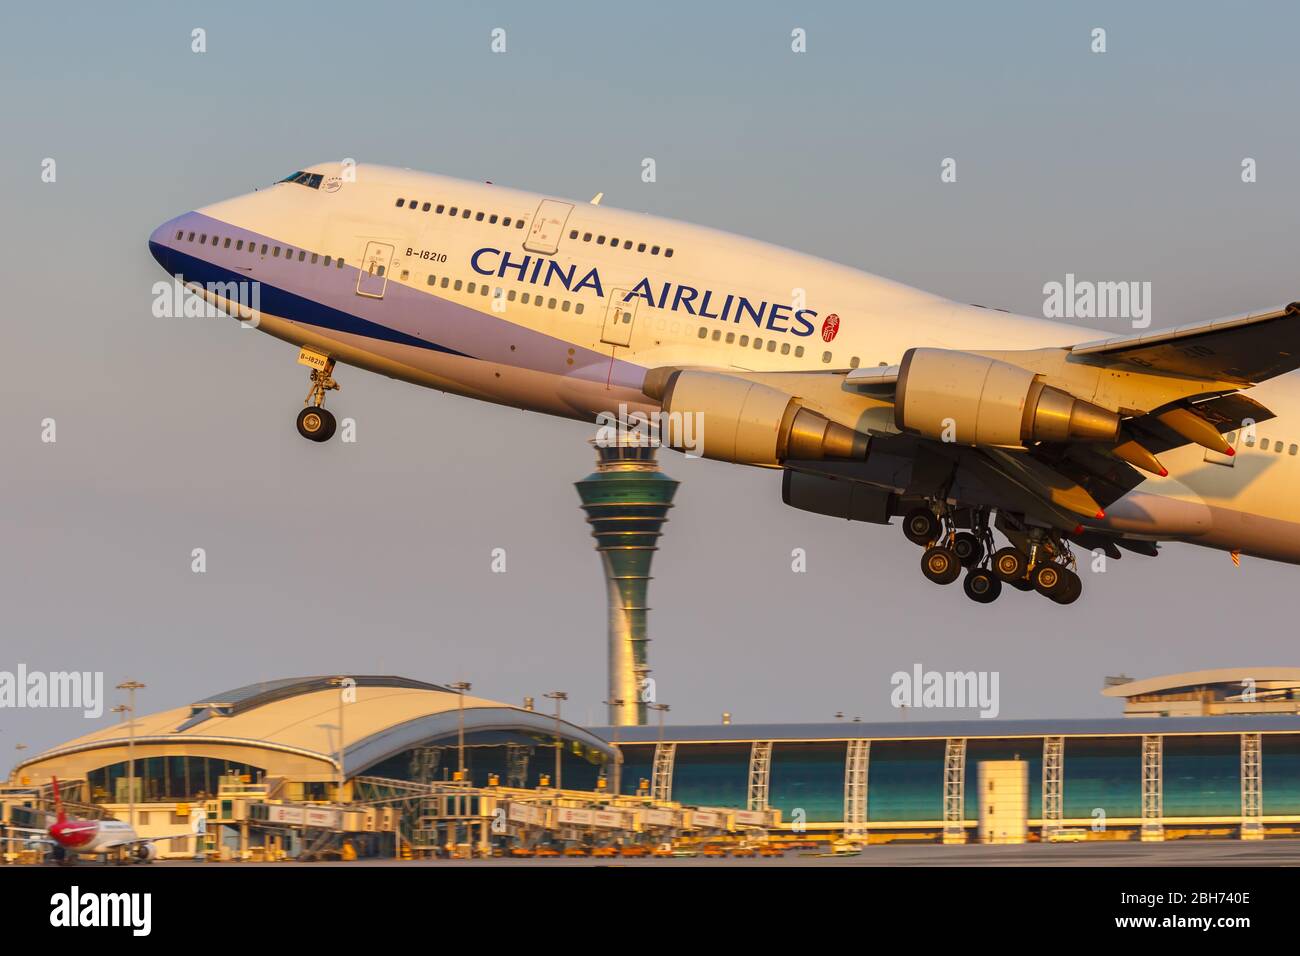 Guangzhou, China – September 23, 2019: China Airlines Boeing 747-400 airplane at Guangzhou airport (CAN) in China. Stock Photo